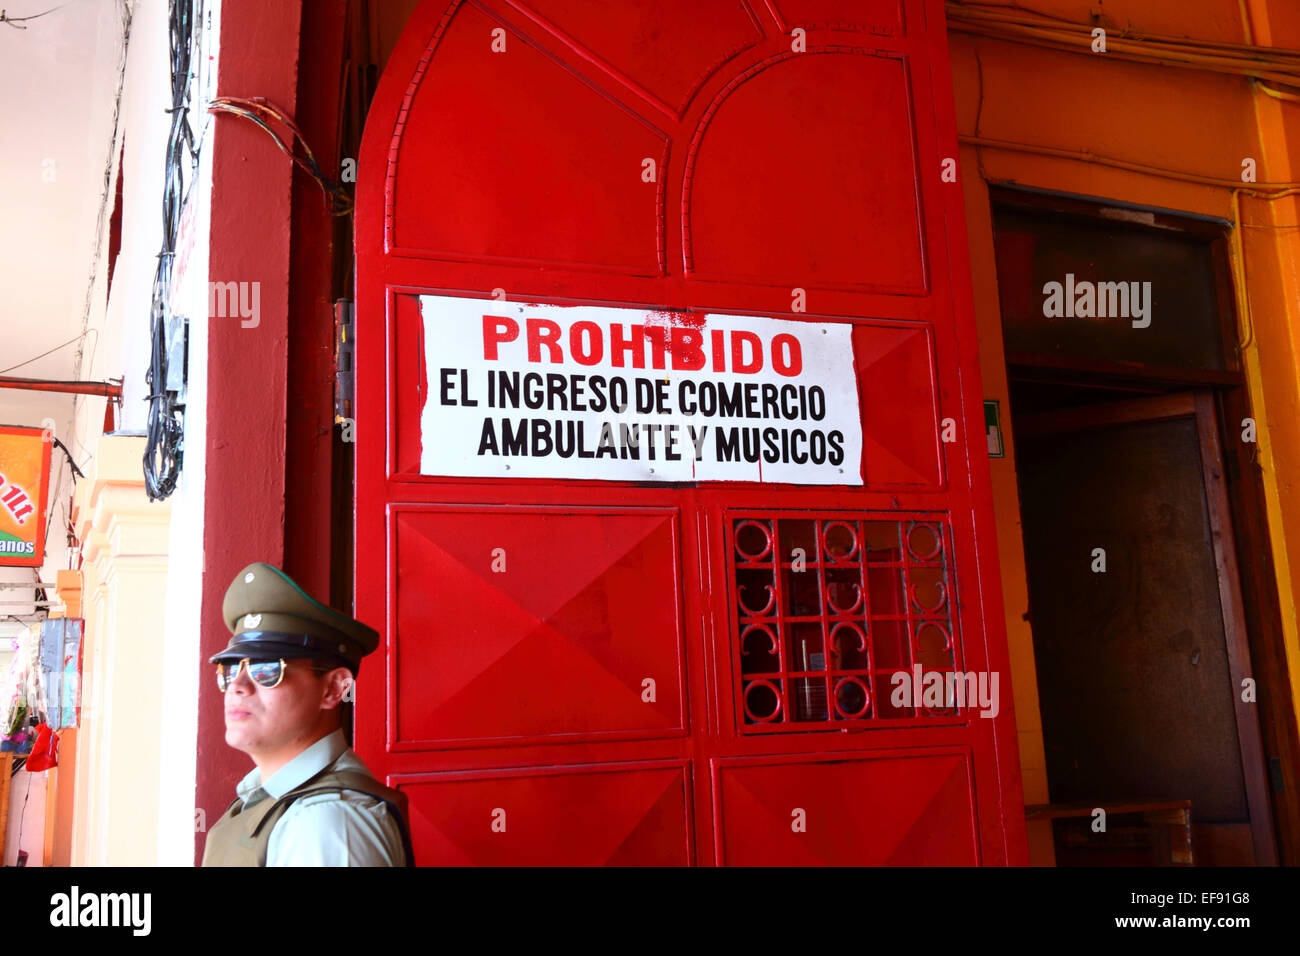 Policeman and sign on entrance to market prohibiting entry of street vendors, informal traders and musicians, Iquique, Chile Stock Photo